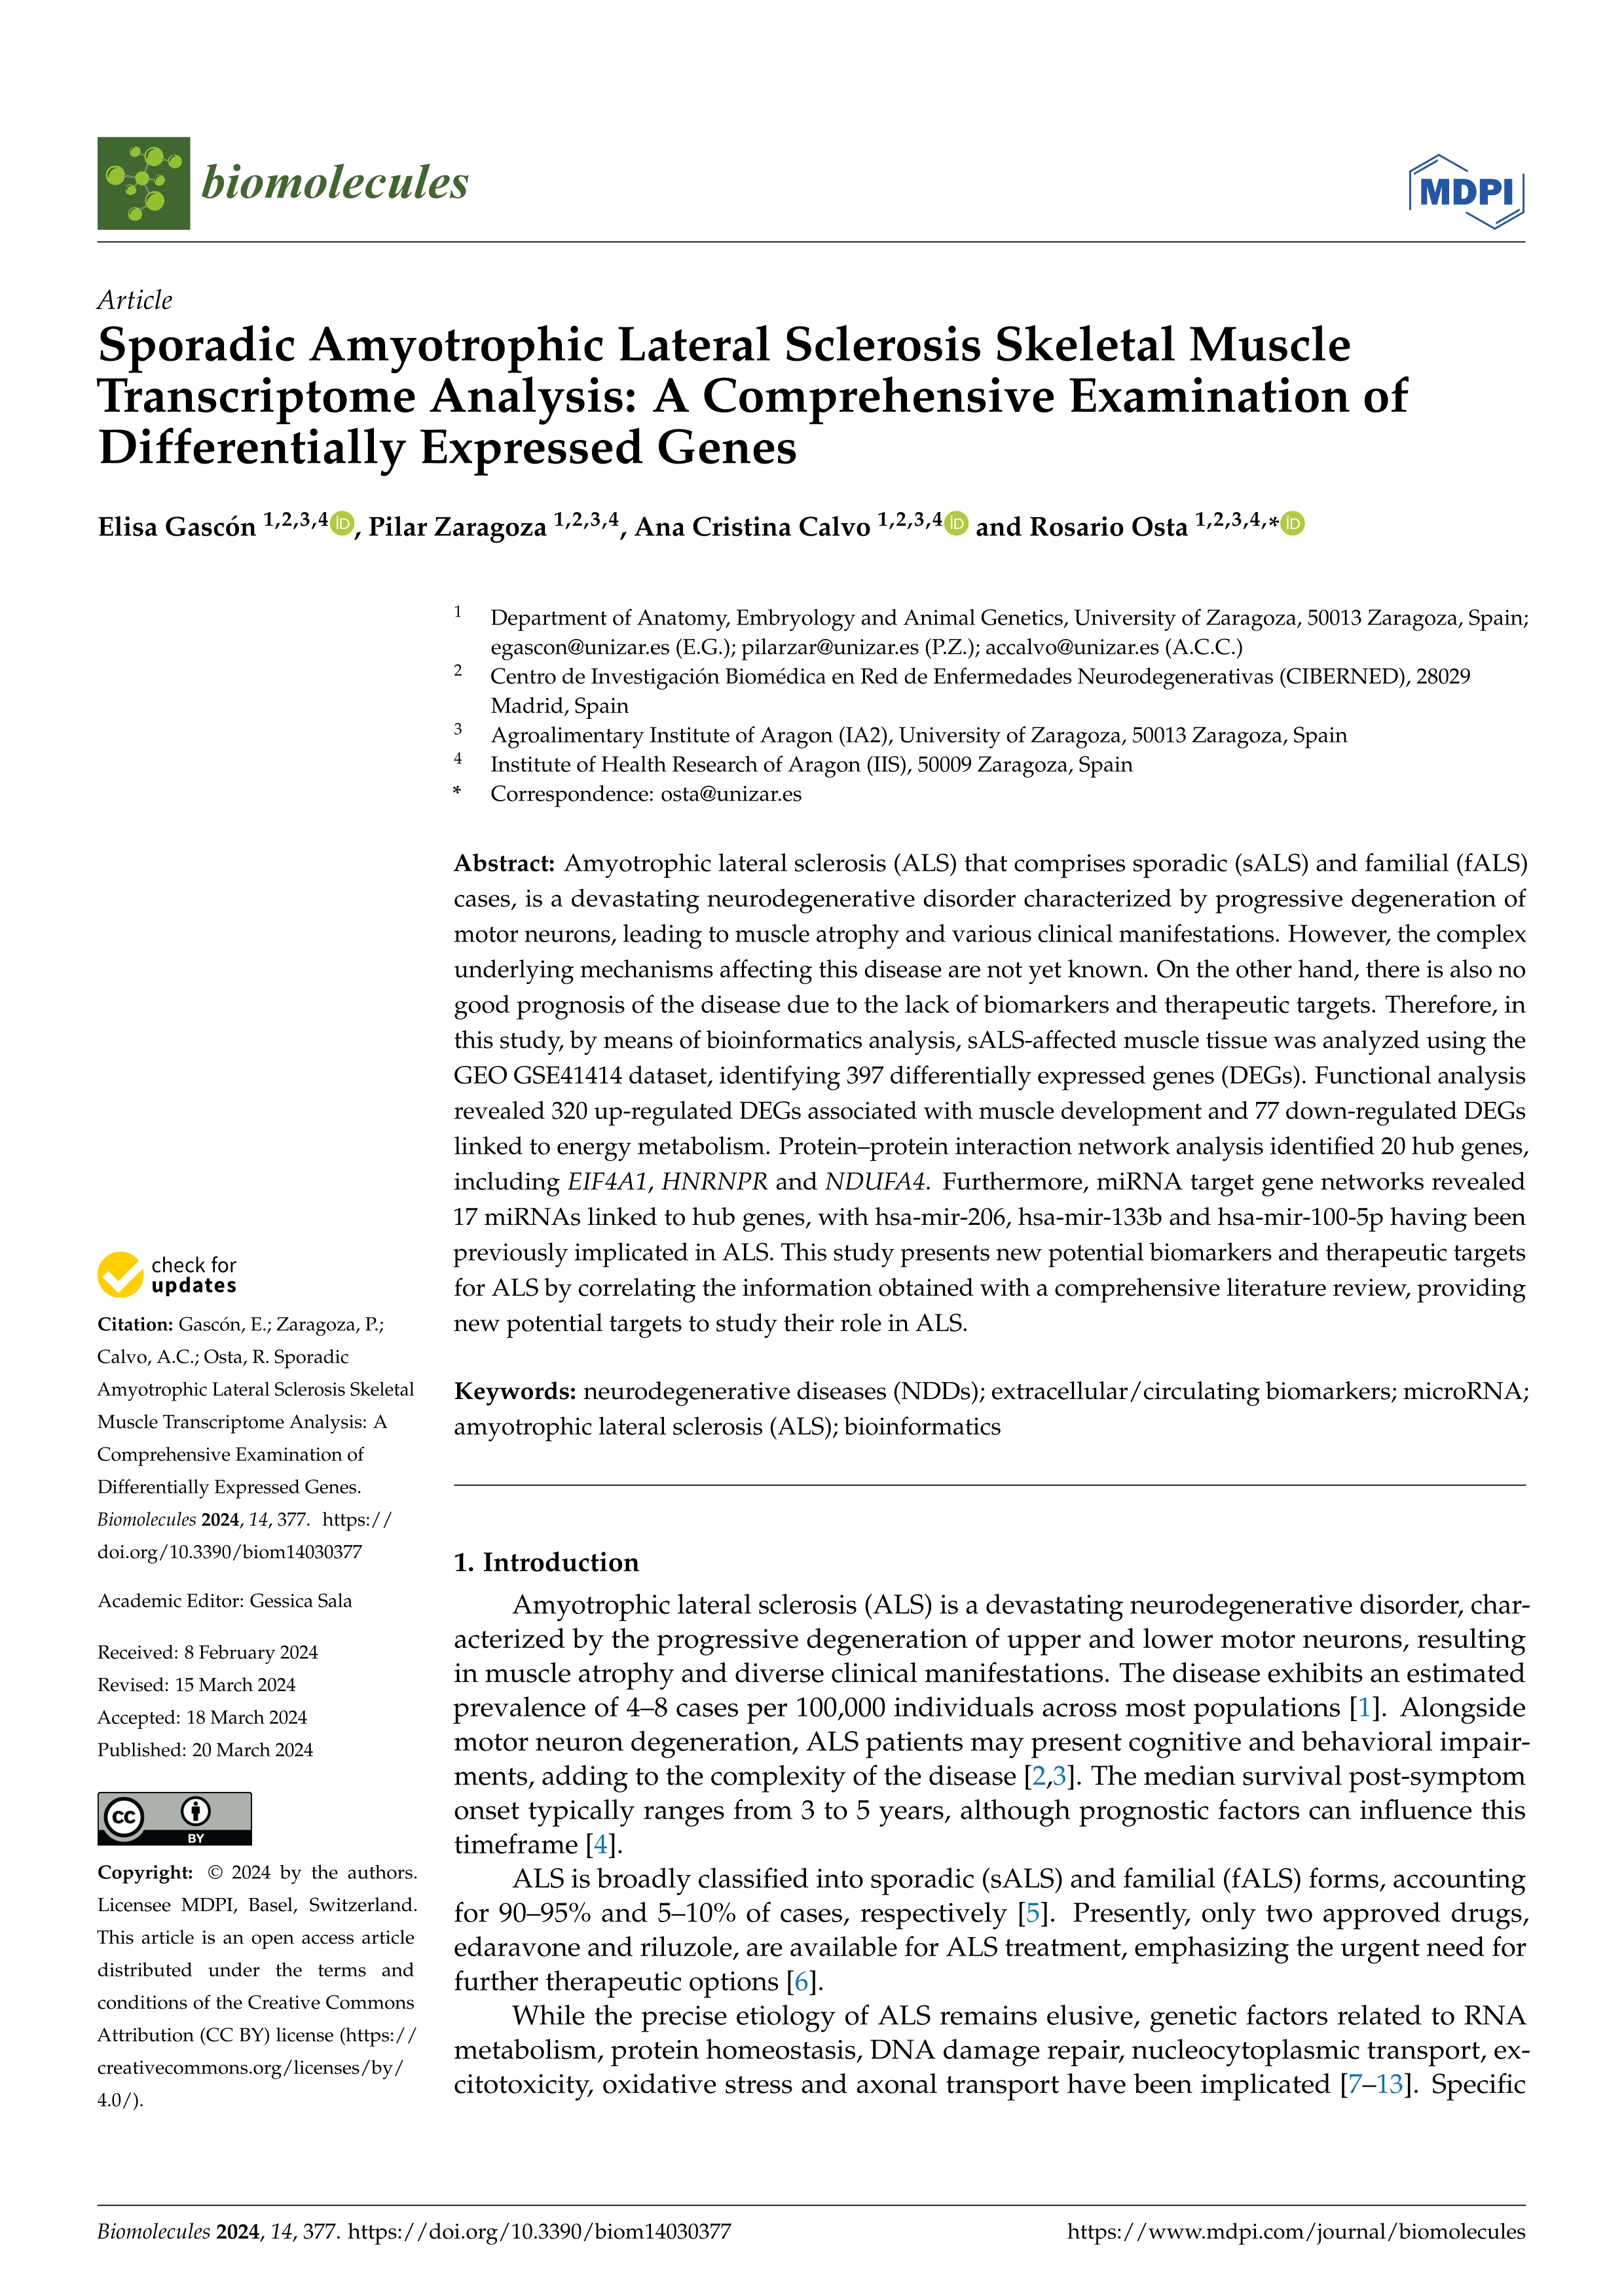 Sporadic amyotrophic lateral sclerosis skeletal muscle transcriptome analysis: a comprehensive examination of differentially expressed genes